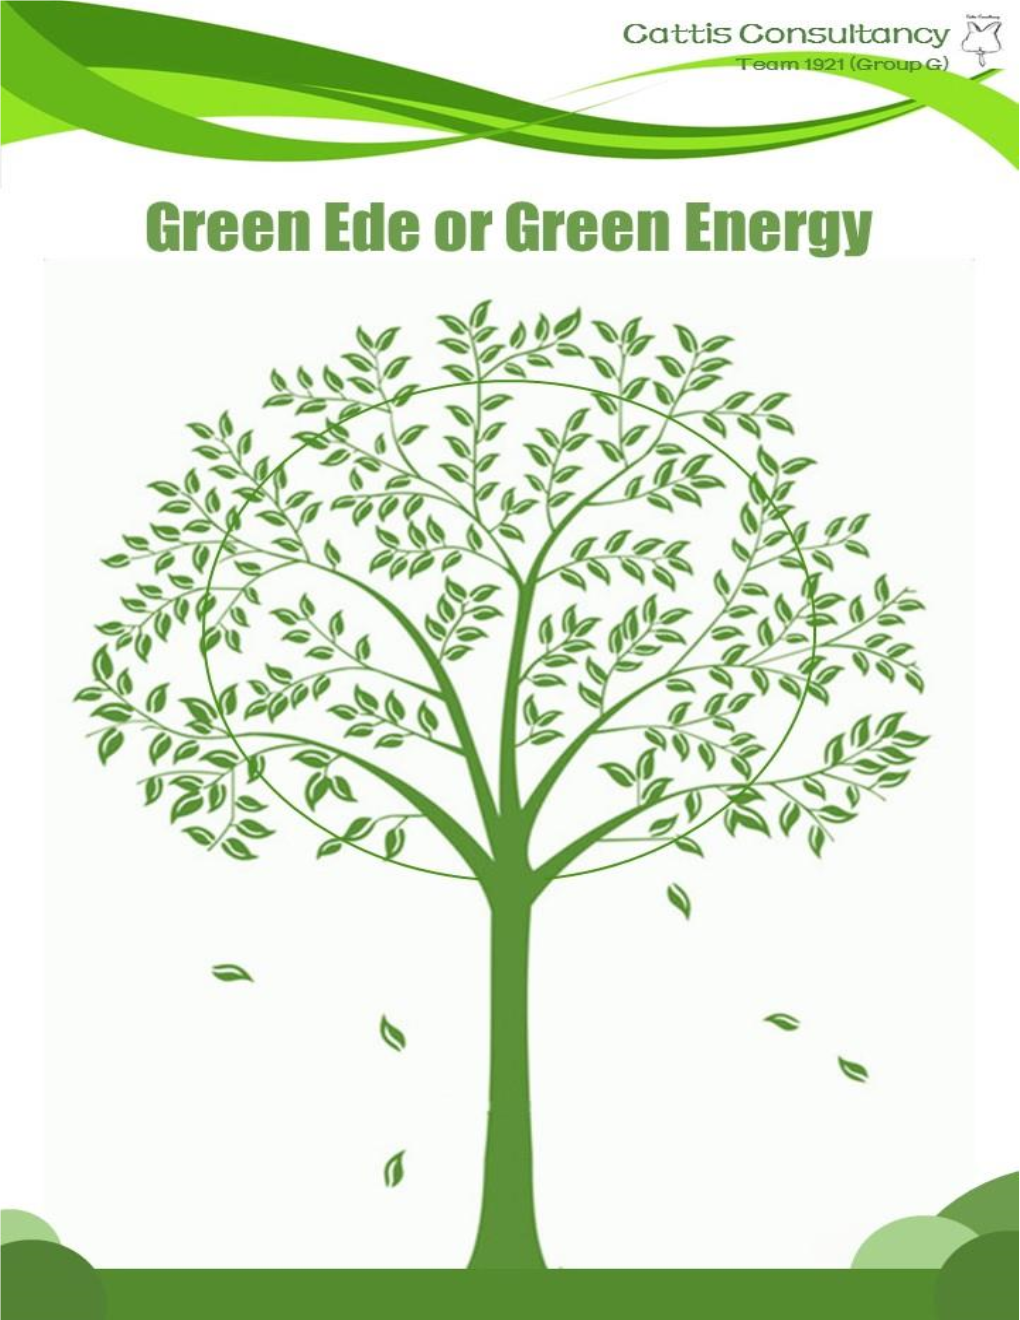 Bio Energy As a Sustainable Solution for Reaching Energy Goals in the Municipality of Ede